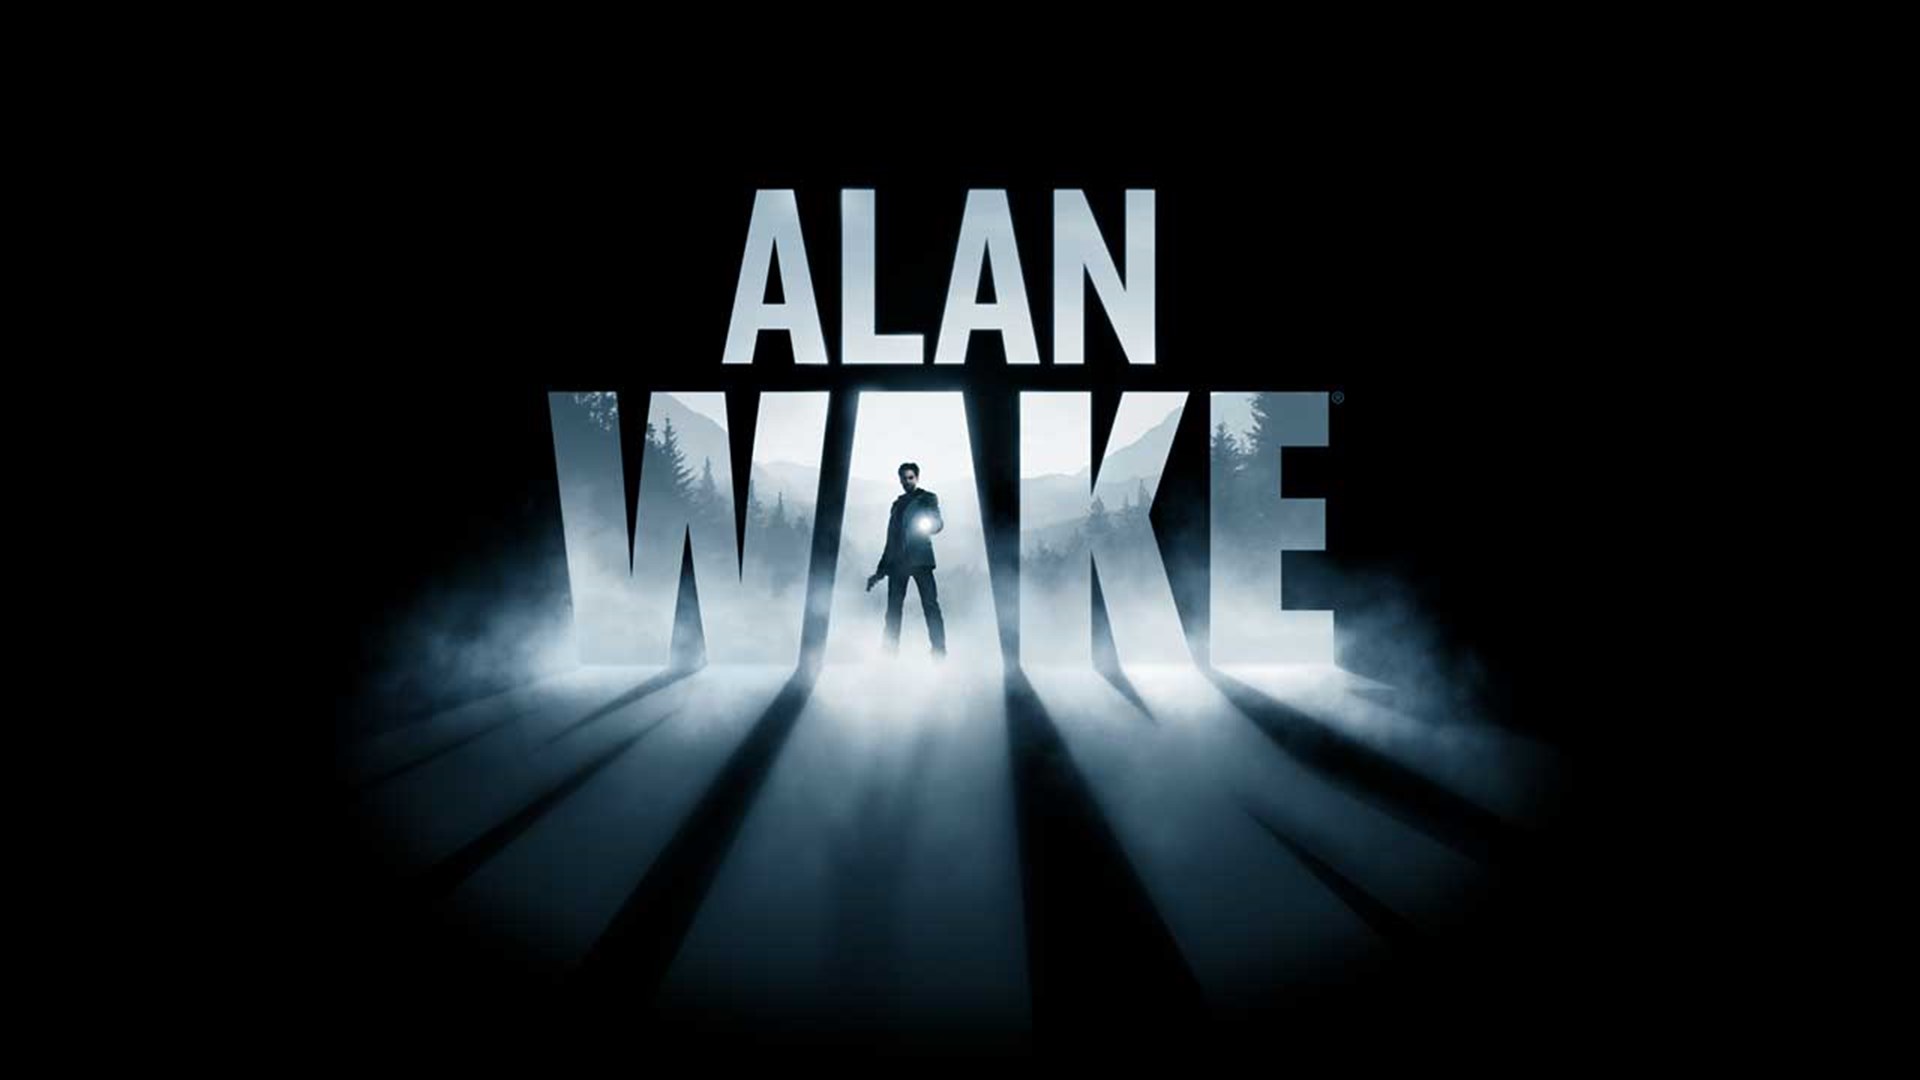 Remedy has finally made Alan Wake available again on the Microsoft Store. Image via Microsoft Store.